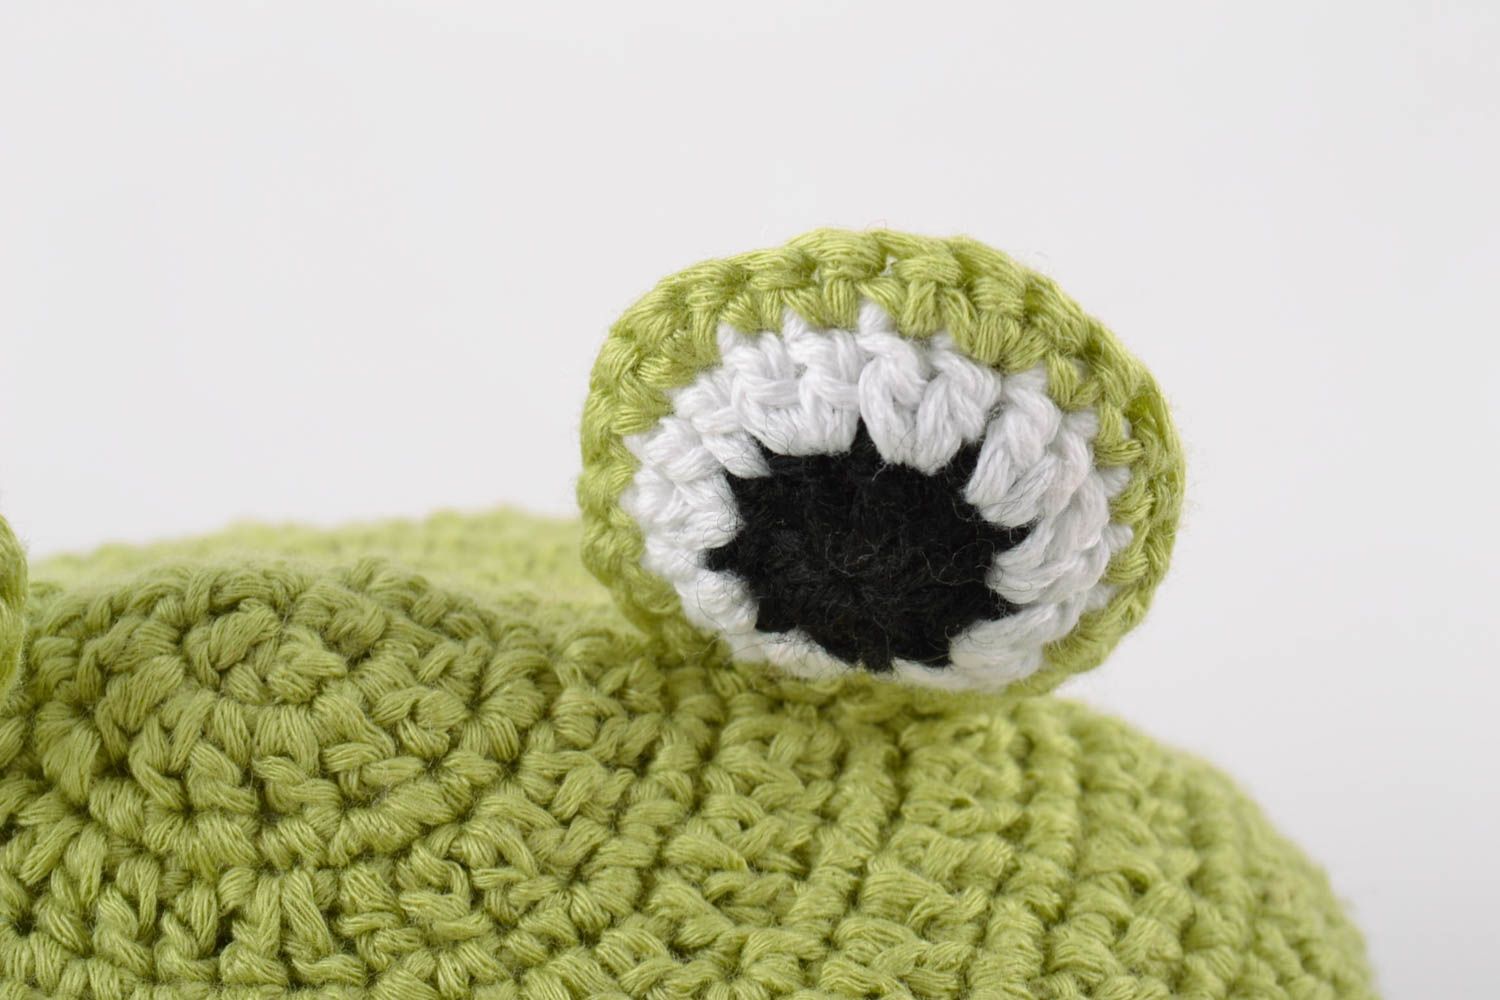 Handmade crocheted hat made of cotton threads in the form of green frog for boys photo 3